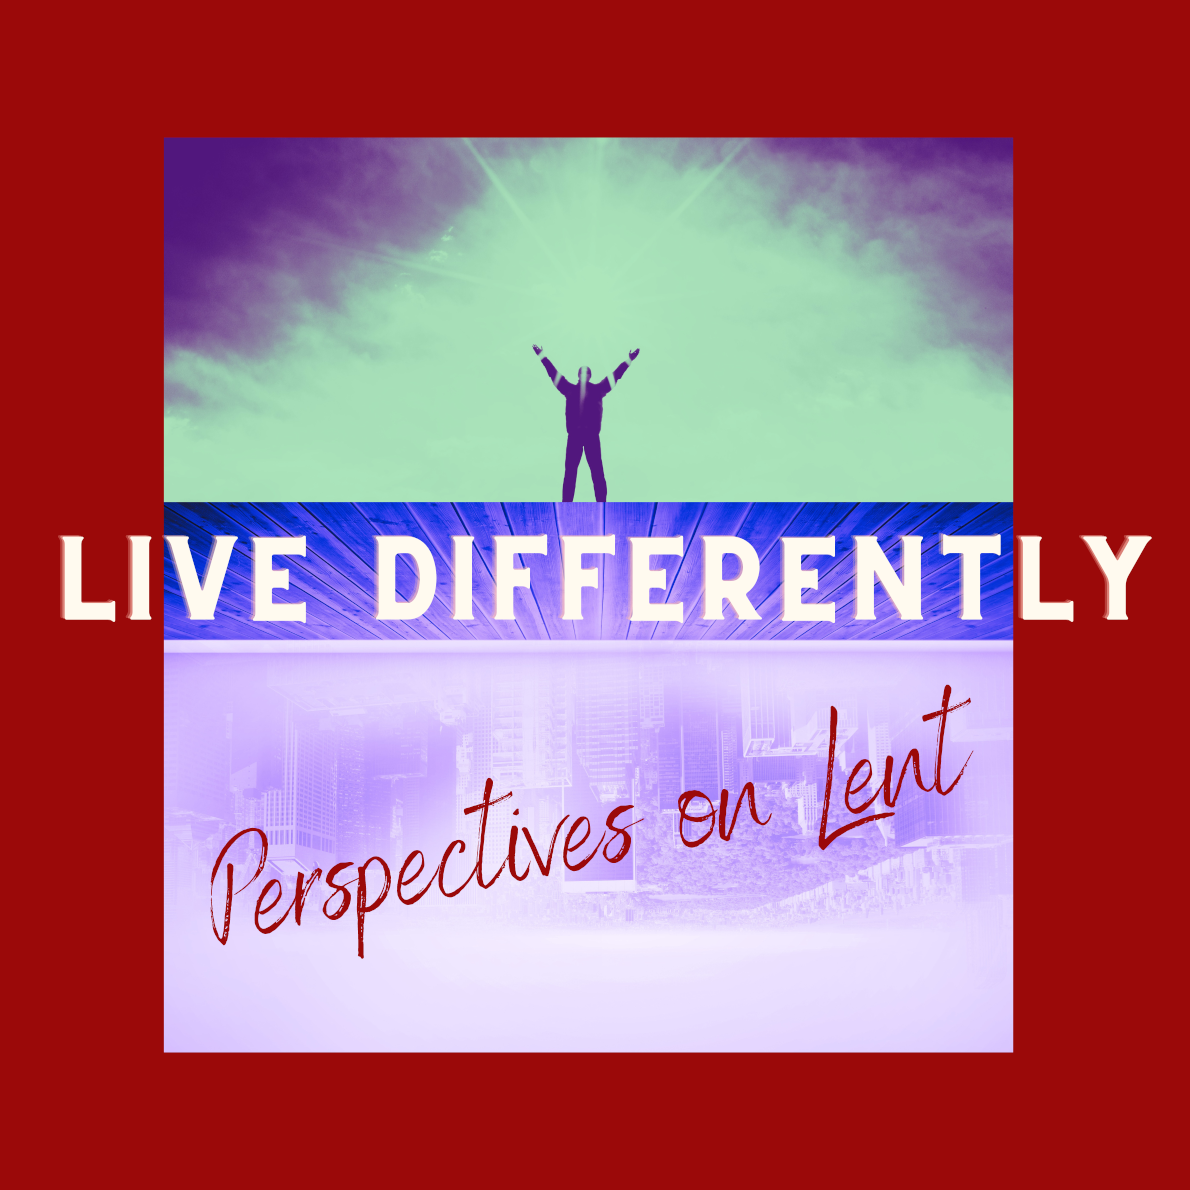 Lent: Live Differently – Persevere